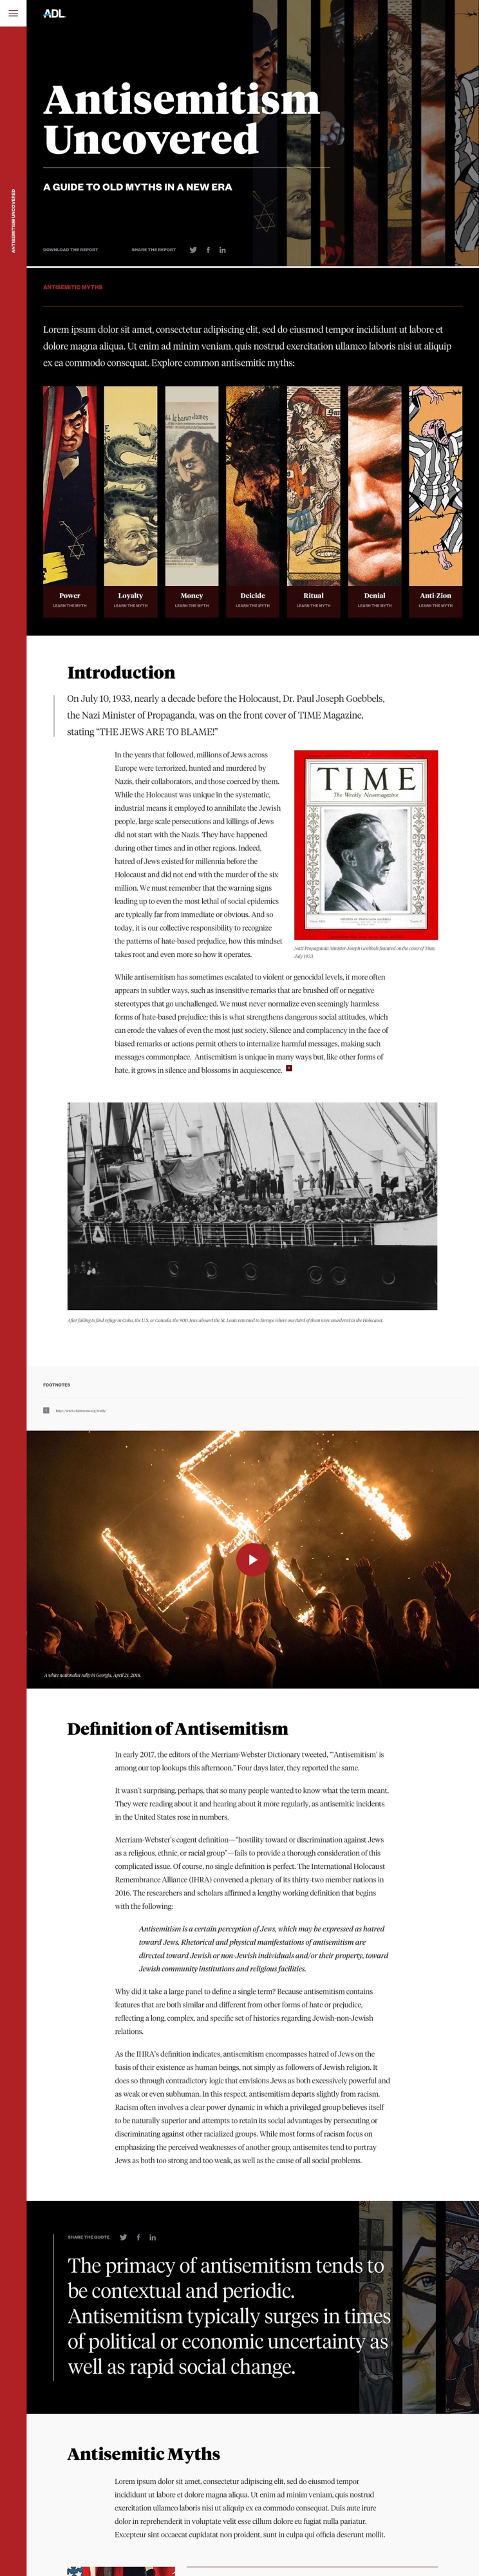 Homepage design for the Antisemitism Uncovered website